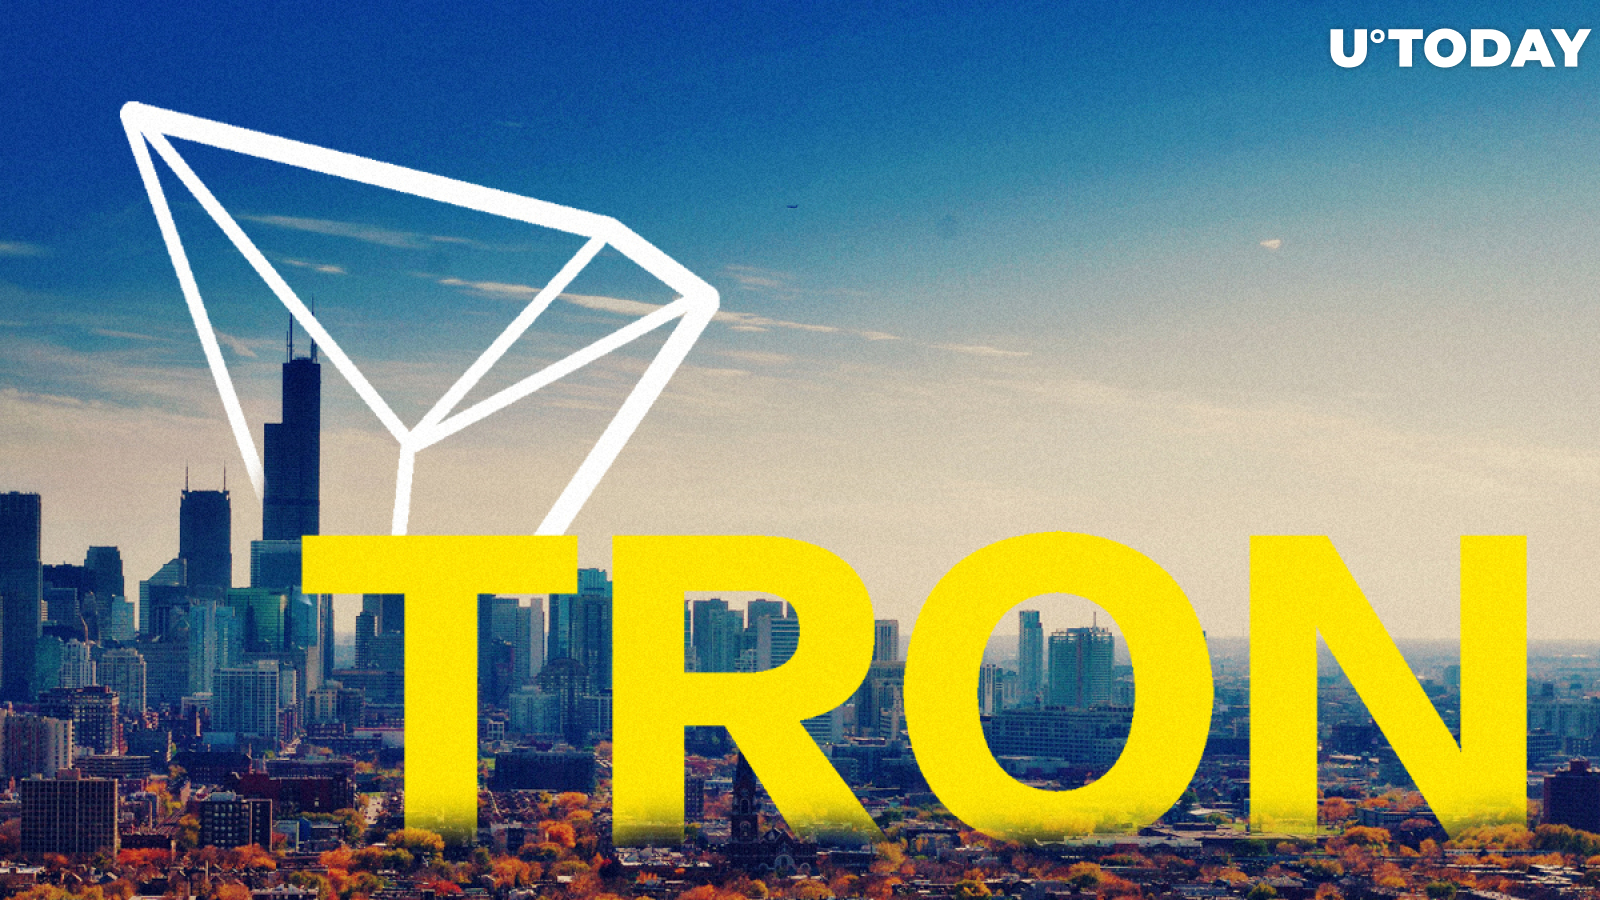 Tron Adoption Expands with over 500,000 Hotels Now Accepting TRX